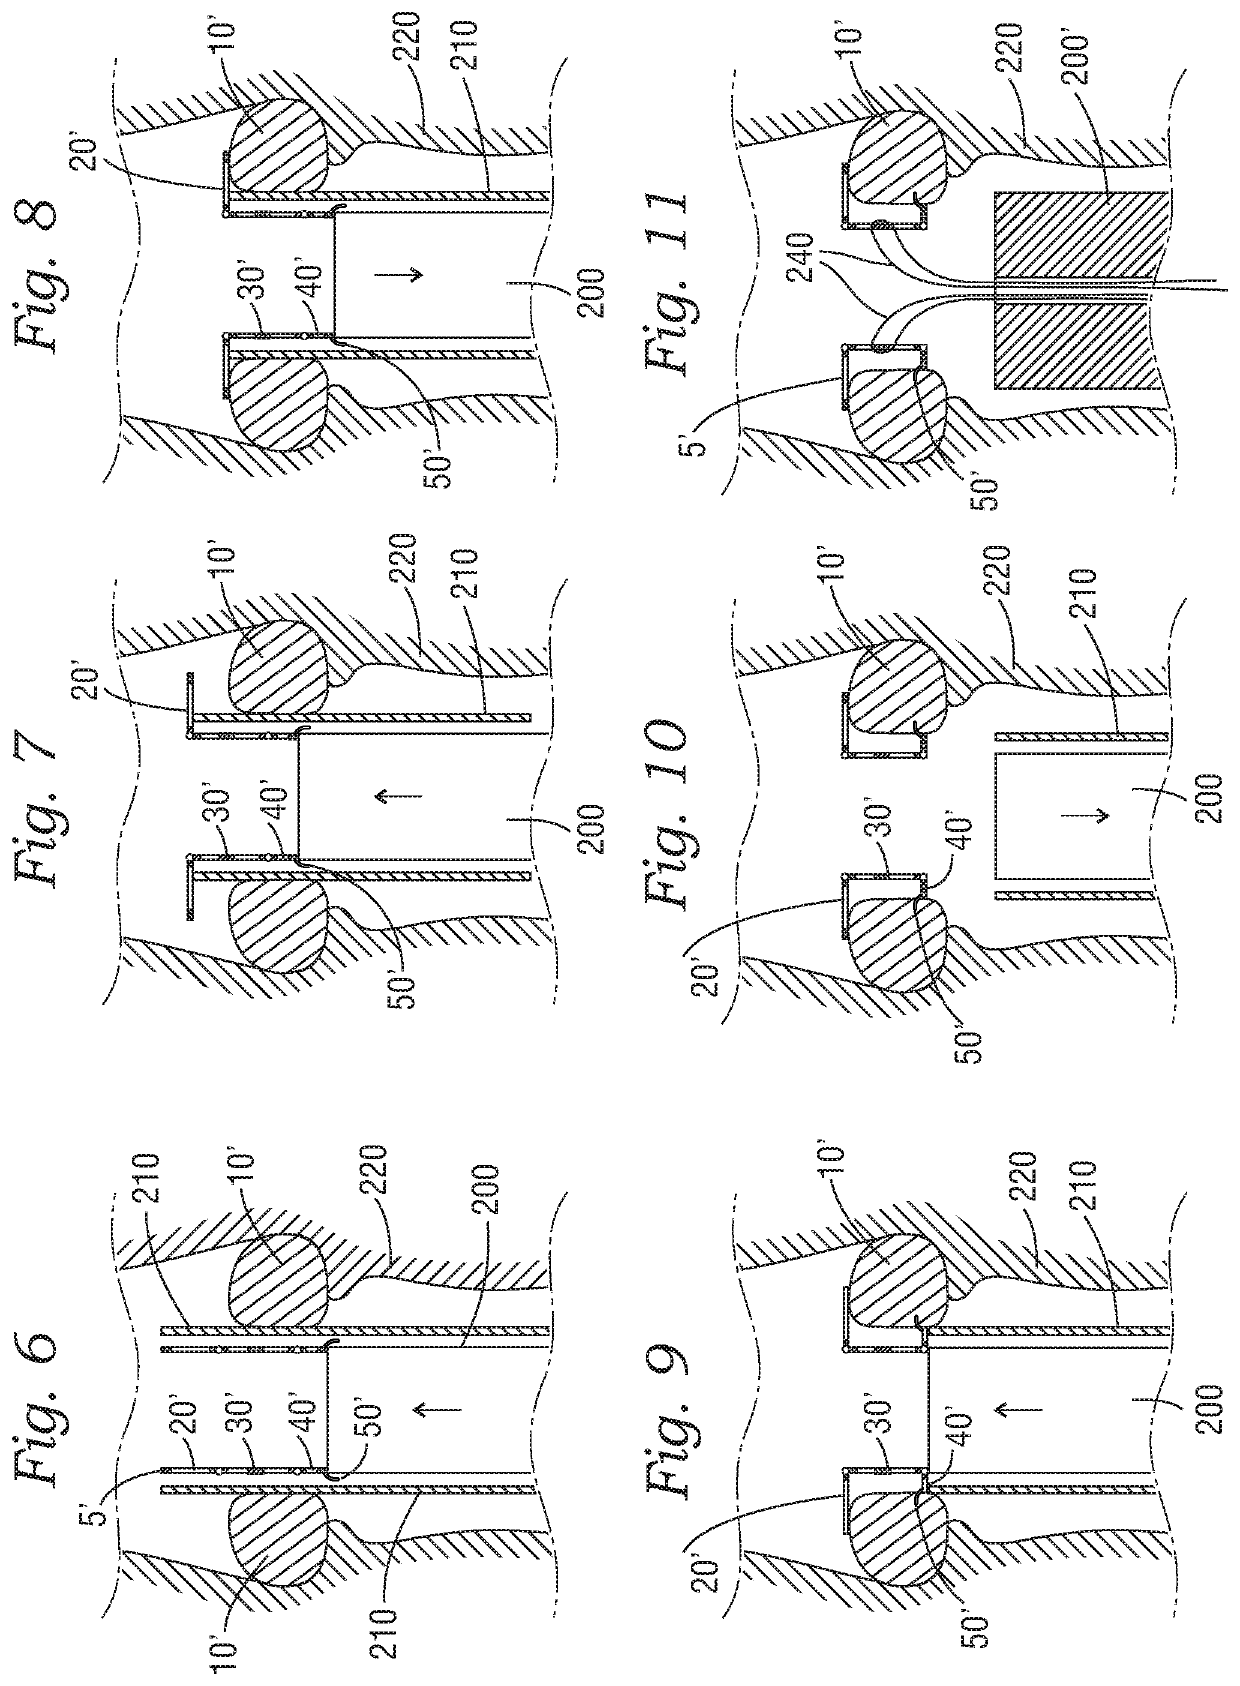 Methods for securing a transcatheter valve to a bioprosthetic cardiac structure